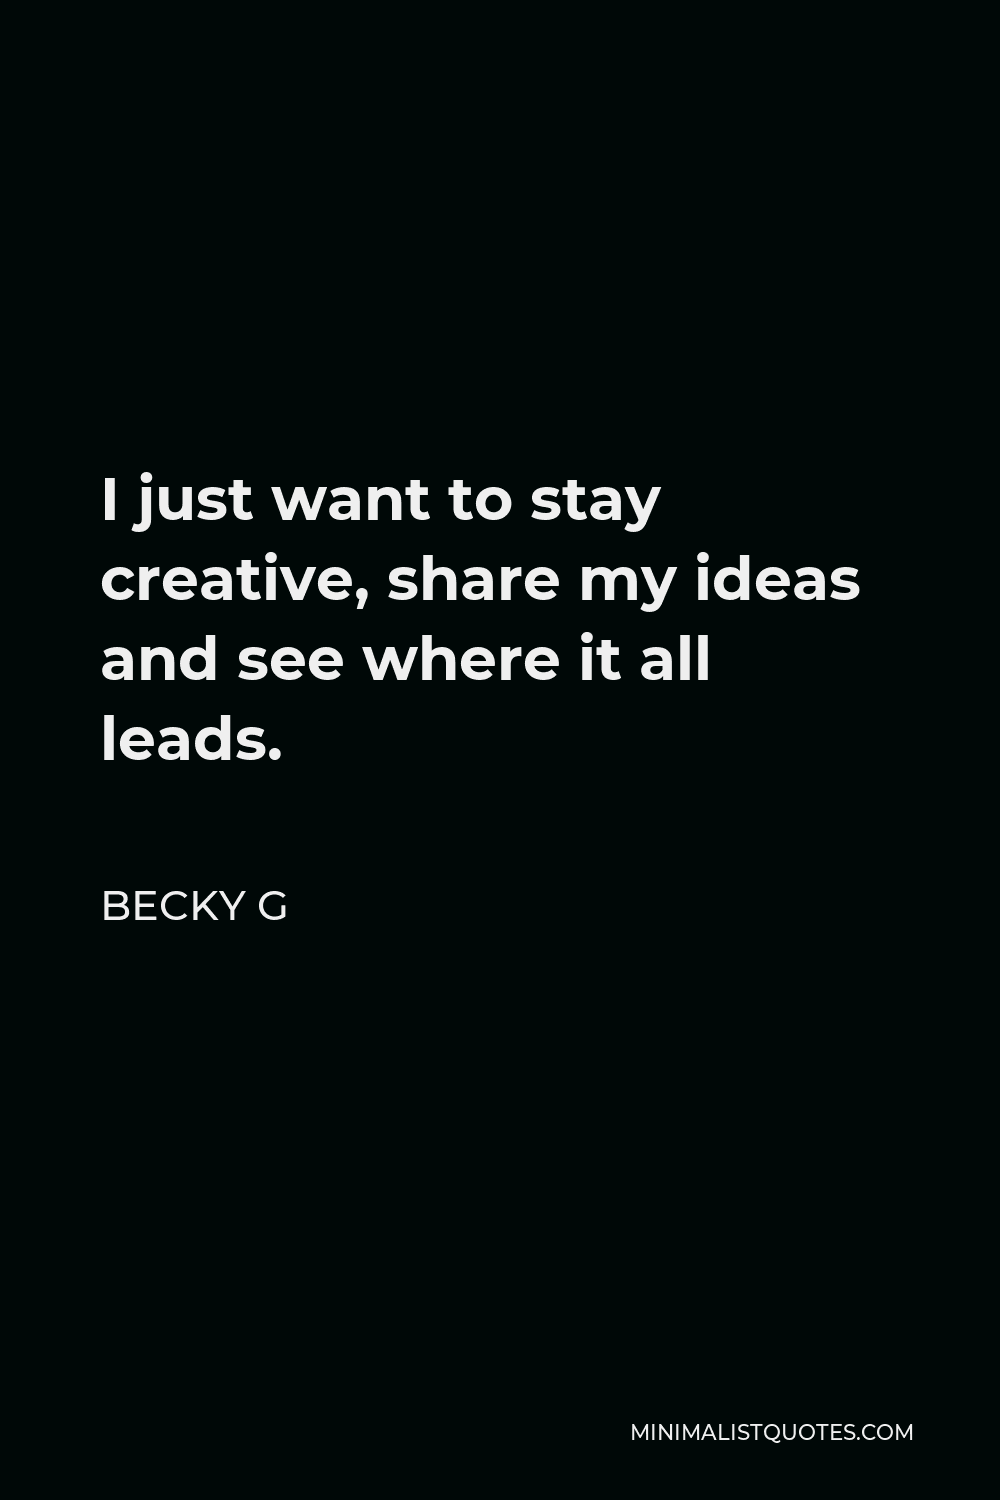 Becky G Quote - I just want to stay creative, share my ideas and see where it all leads.